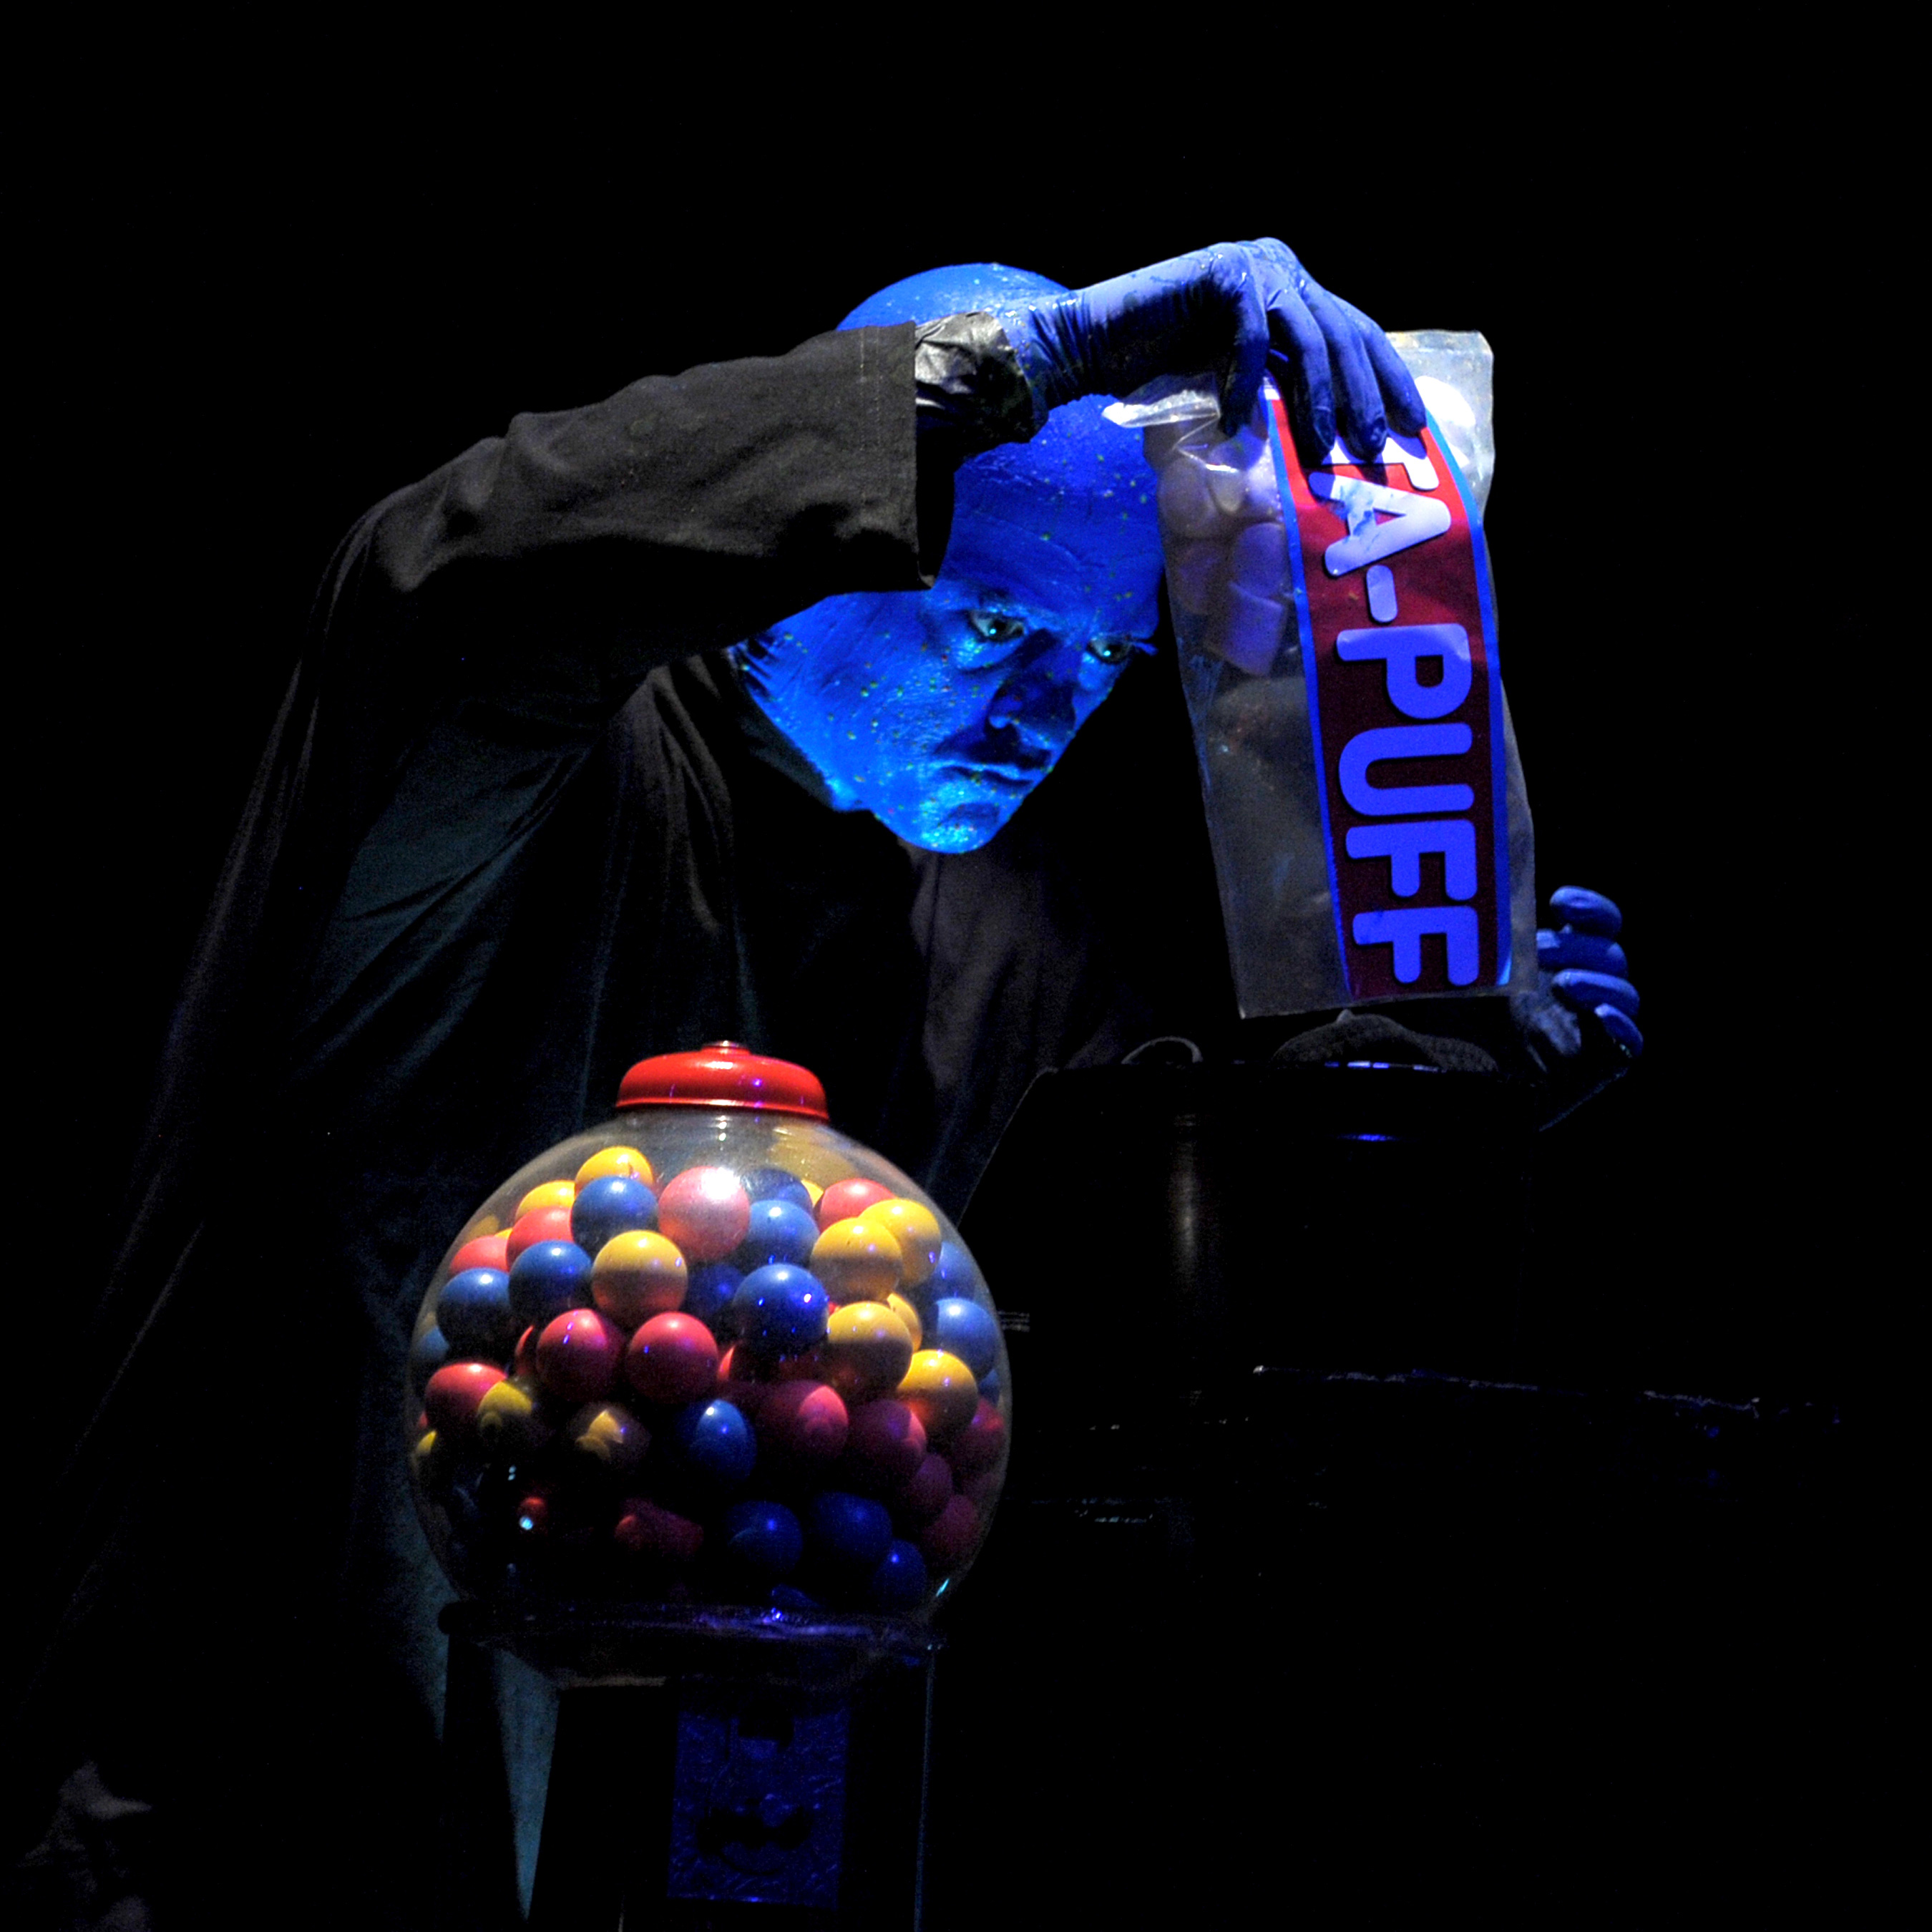 Blue Man Group Adds Performances To Spring Schedule For Multi-Sensory Spring Break Experience 1 Blue Man Group, continuing its open run at Chicago’s Briar Street Theatre (3133 N. Halsted Street), is celebrating the spring season with the announcement of additional performances. The enhanced performance calendar will provide audiences with more opportunities to experience the ultimate spring break adventure.The critically acclaimed Blue Man Group blends innovative dramatic spectacle and dynamic original music with hilarious comedy, art, technology and science to create a performance experience unlike any other. The show provides audiences with a unique and exhilarating multi-sensory experience that is a truly must see experience.